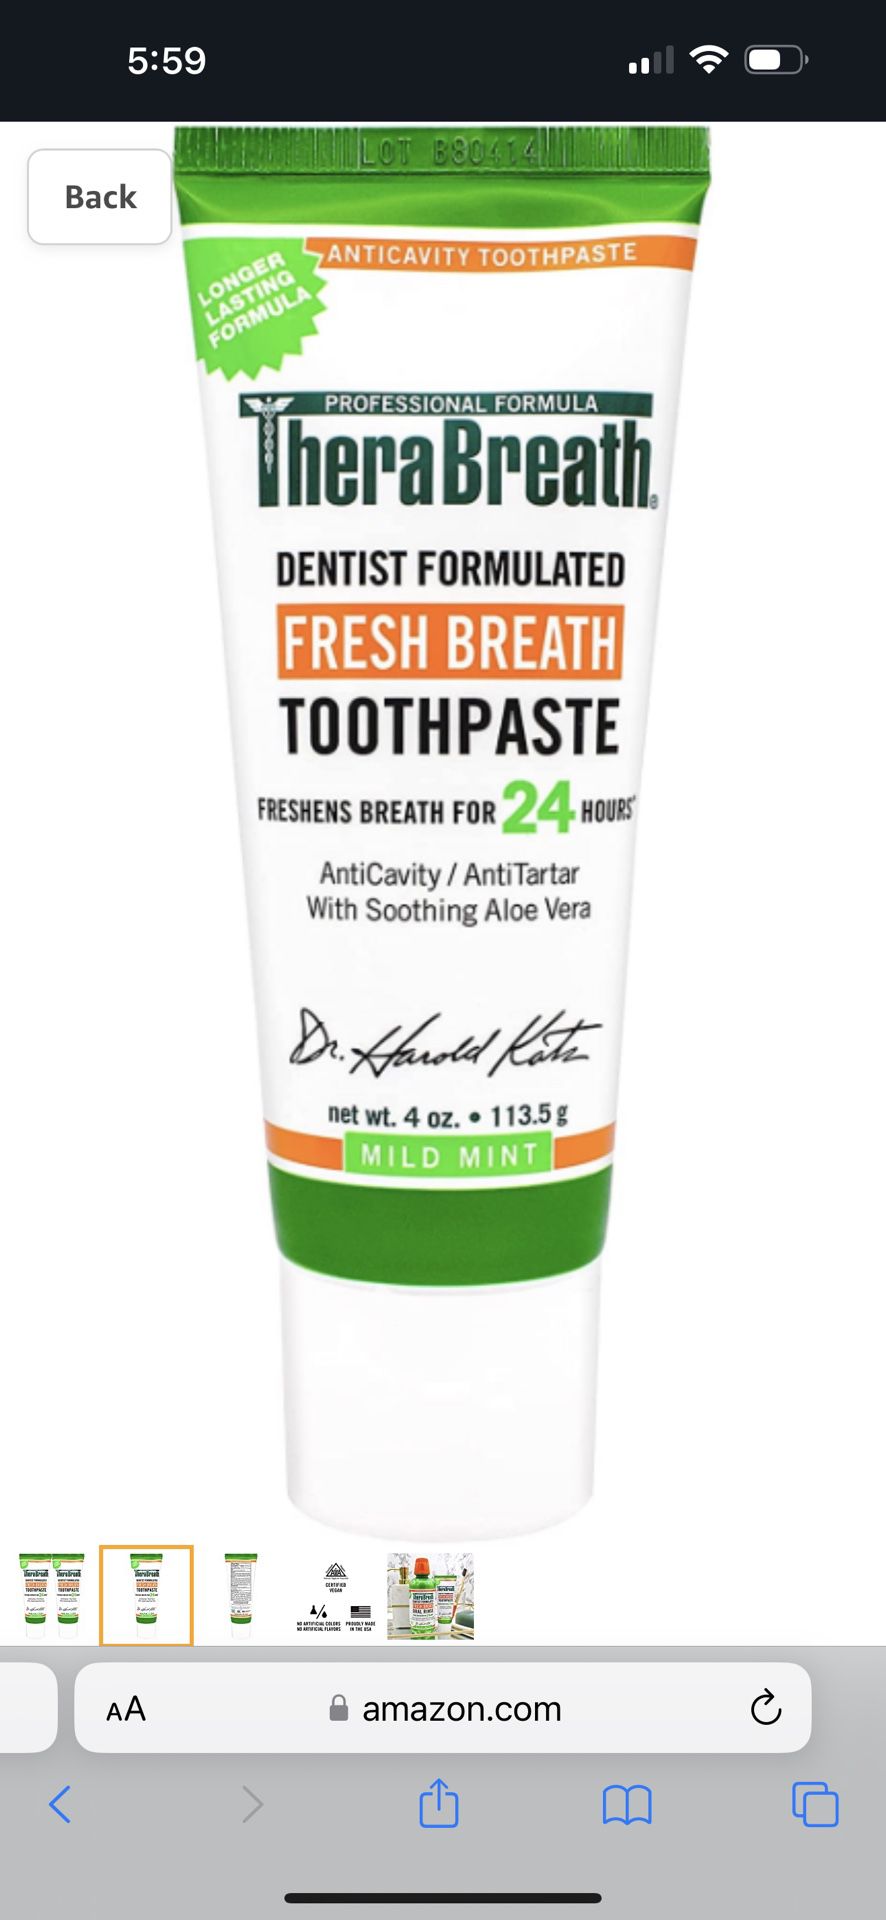 TheraBreath Fresh Breath Dentist Formulated 24-Hour Toothpaste, Mild Mint, 4 Ounce Pack of 3